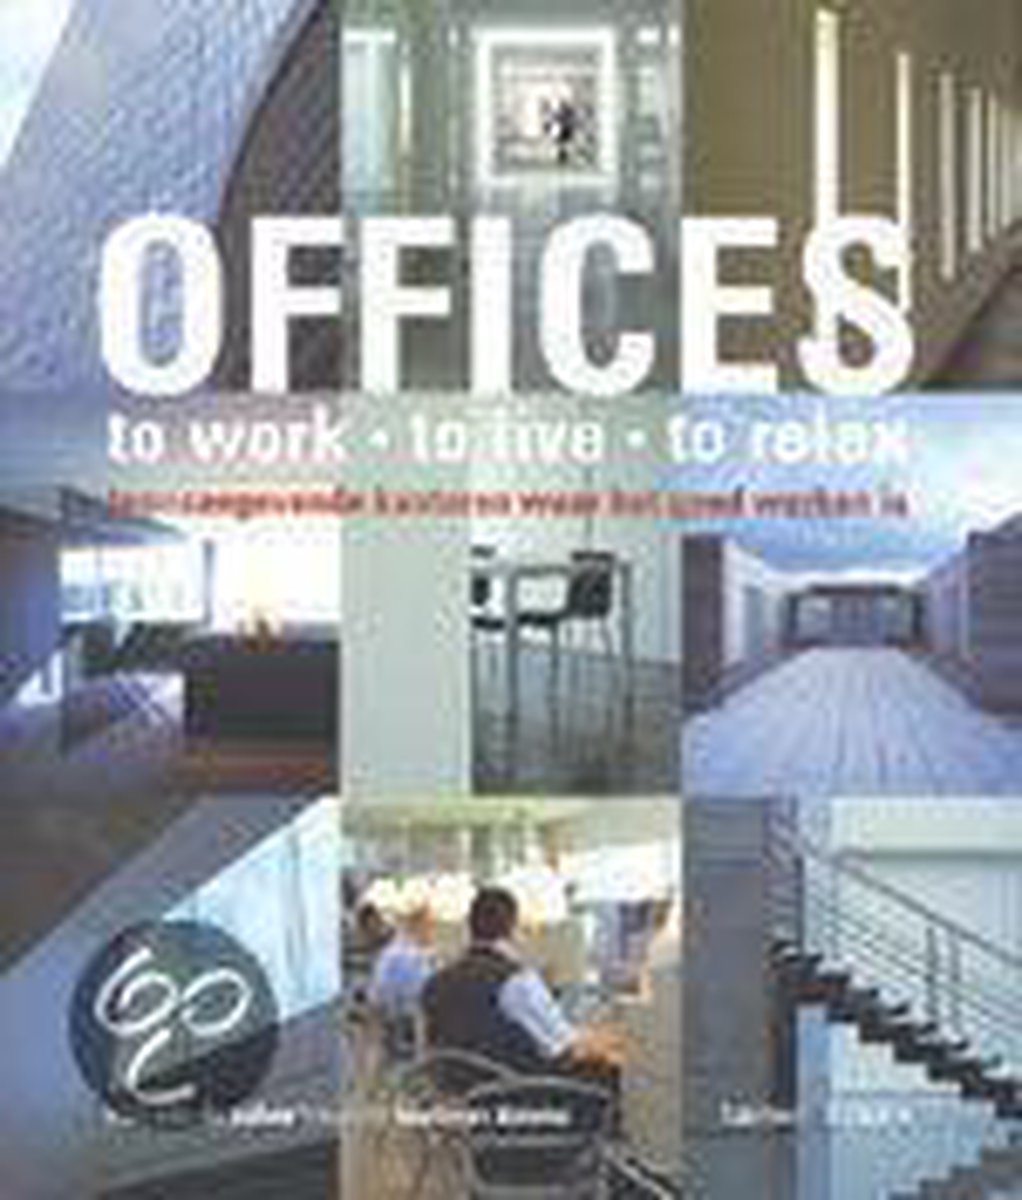 Offices To Work To Live To Relax